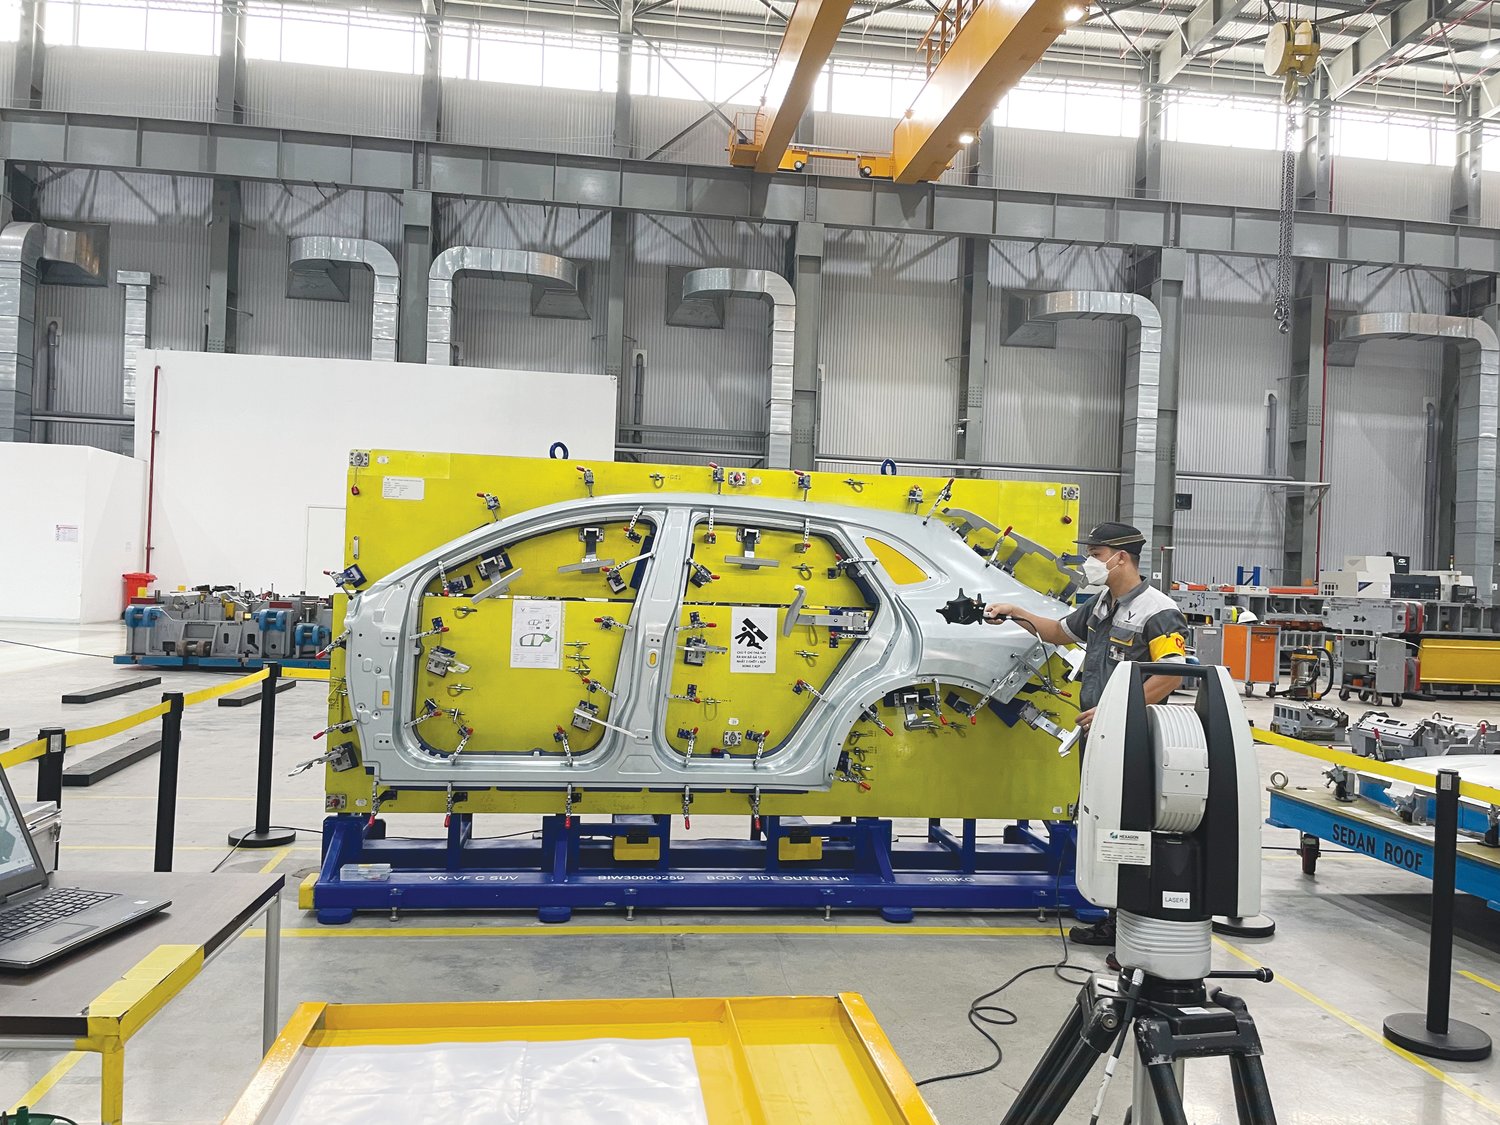 More than 3,000 robots manufacture EVs inside the VinFast complex. The process is more than 80% automated and produces up to 38 vehicles per hour.